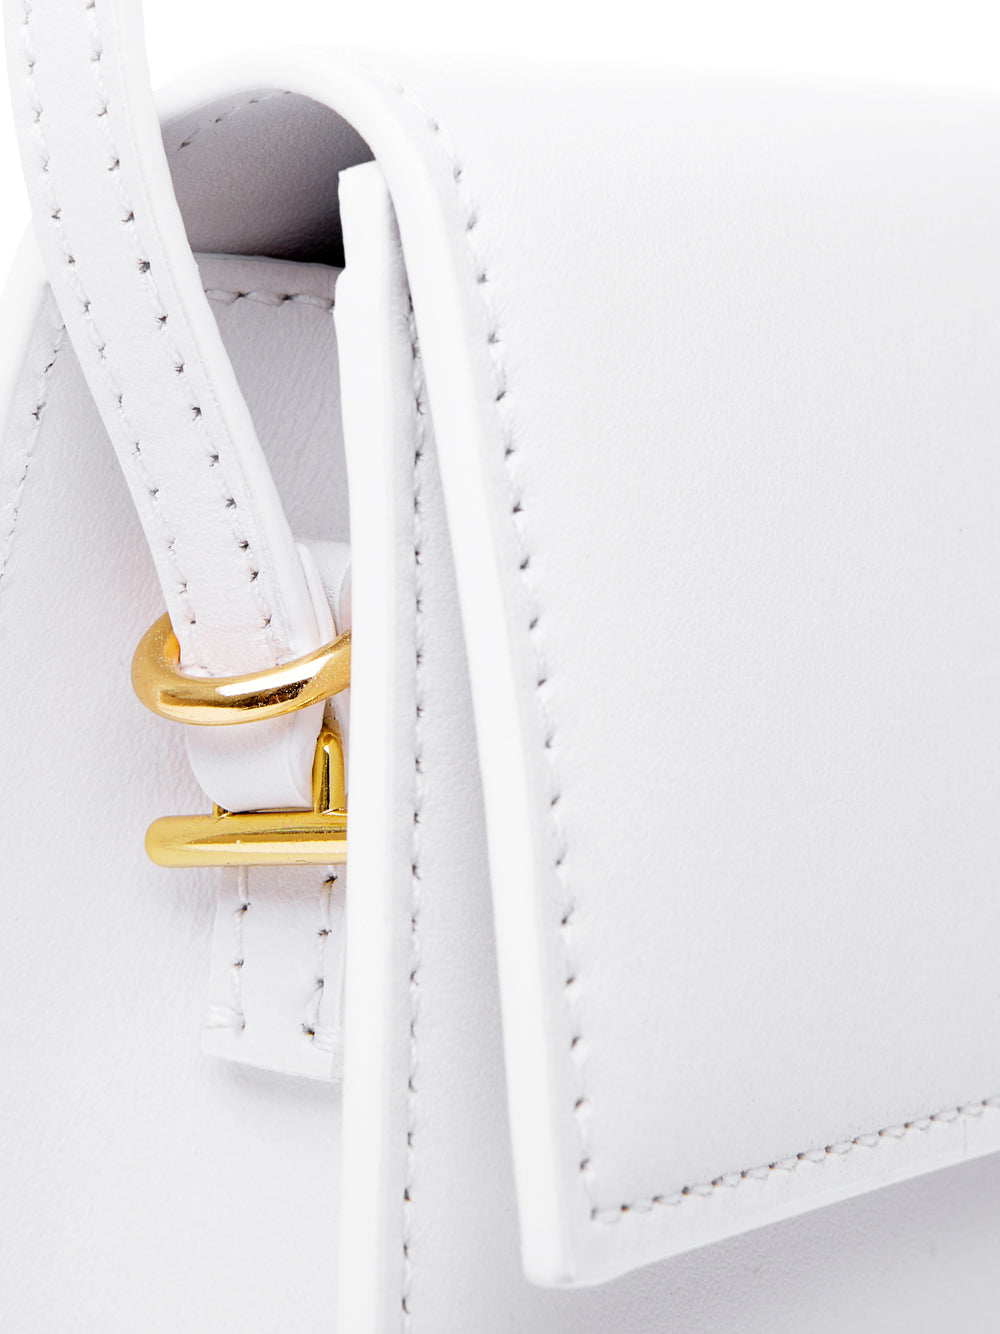 Le Bambino Long Jacquemus leather bag in white